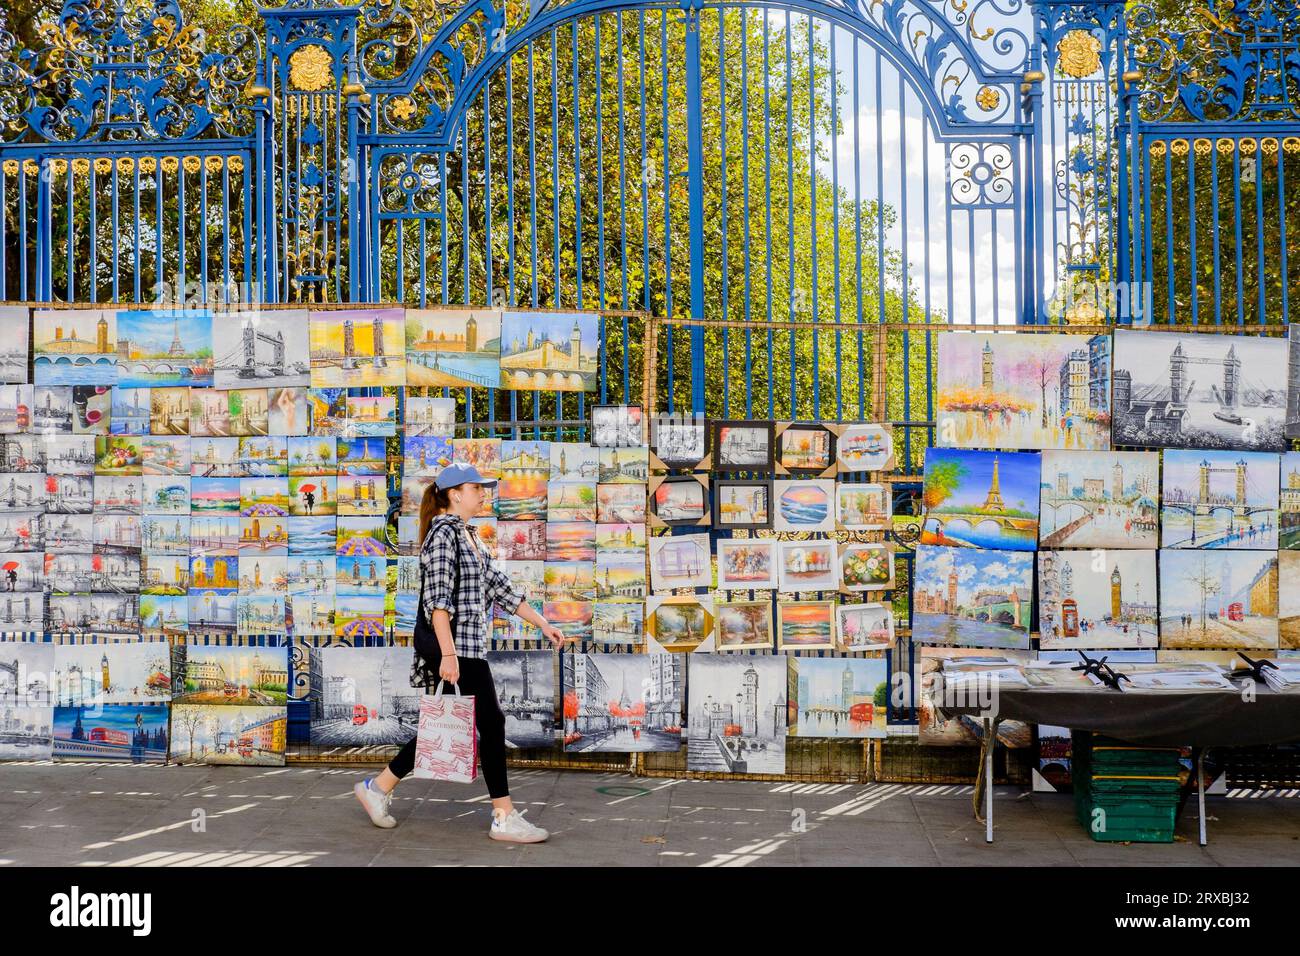 Paintings for sale hung on the railings of The Green Park at Piccadilly Art Market, London, UK Stock Photo